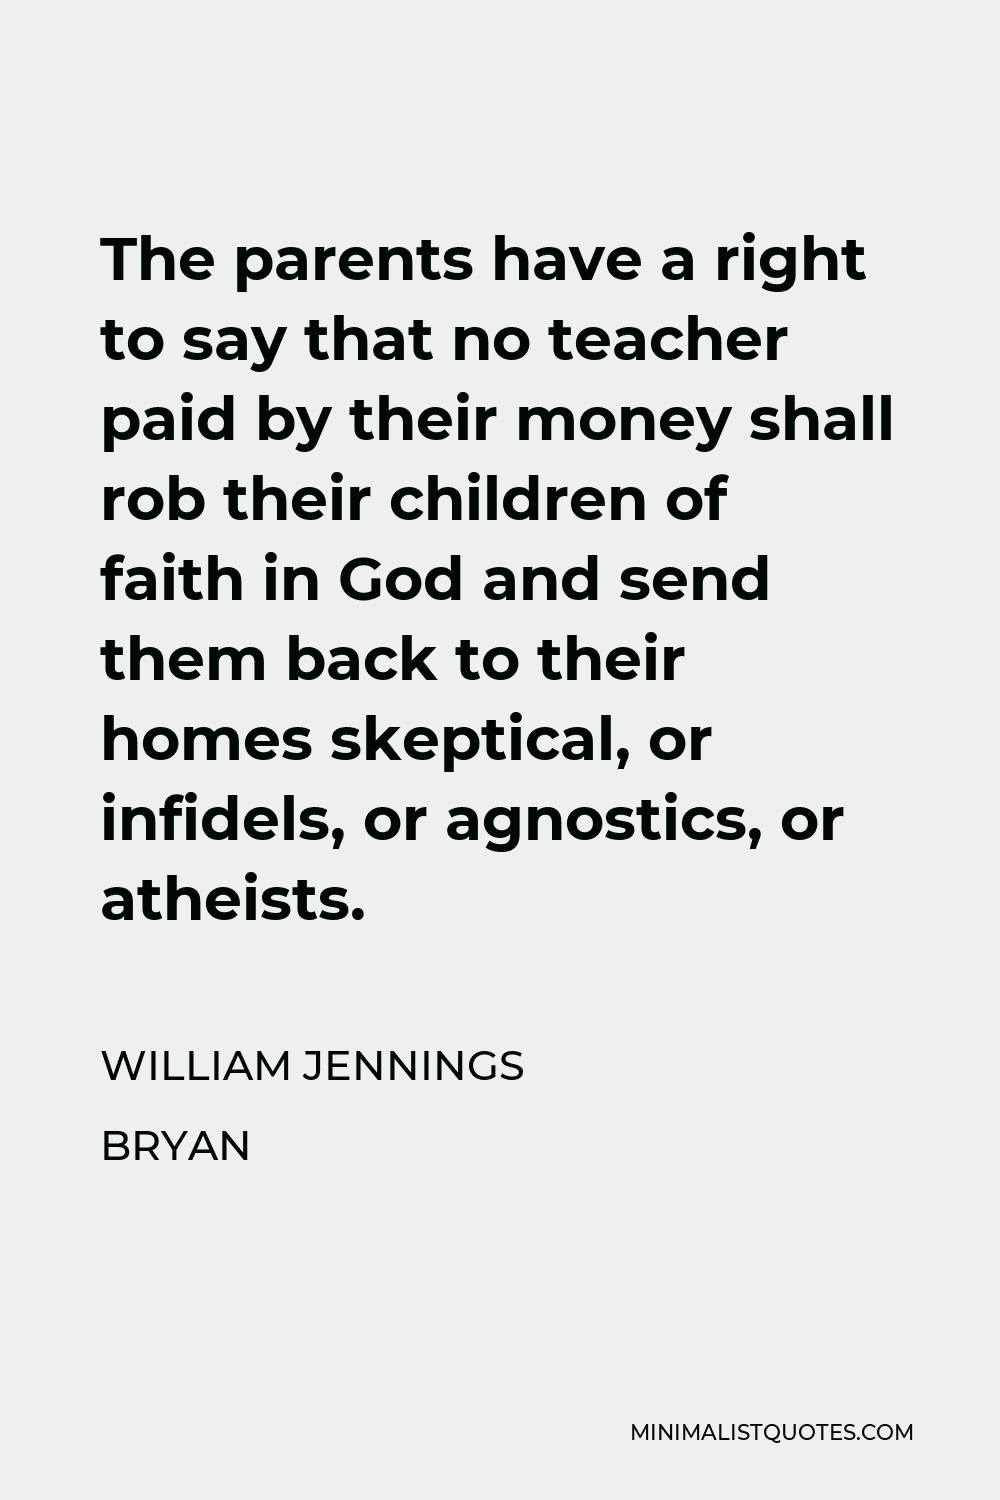 William Jennings Bryan Quote - The parents have a right to say that no teacher paid by their money shall rob their children of faith in God and send them back to their homes skeptical, or infidels, or agnostics, or atheists.